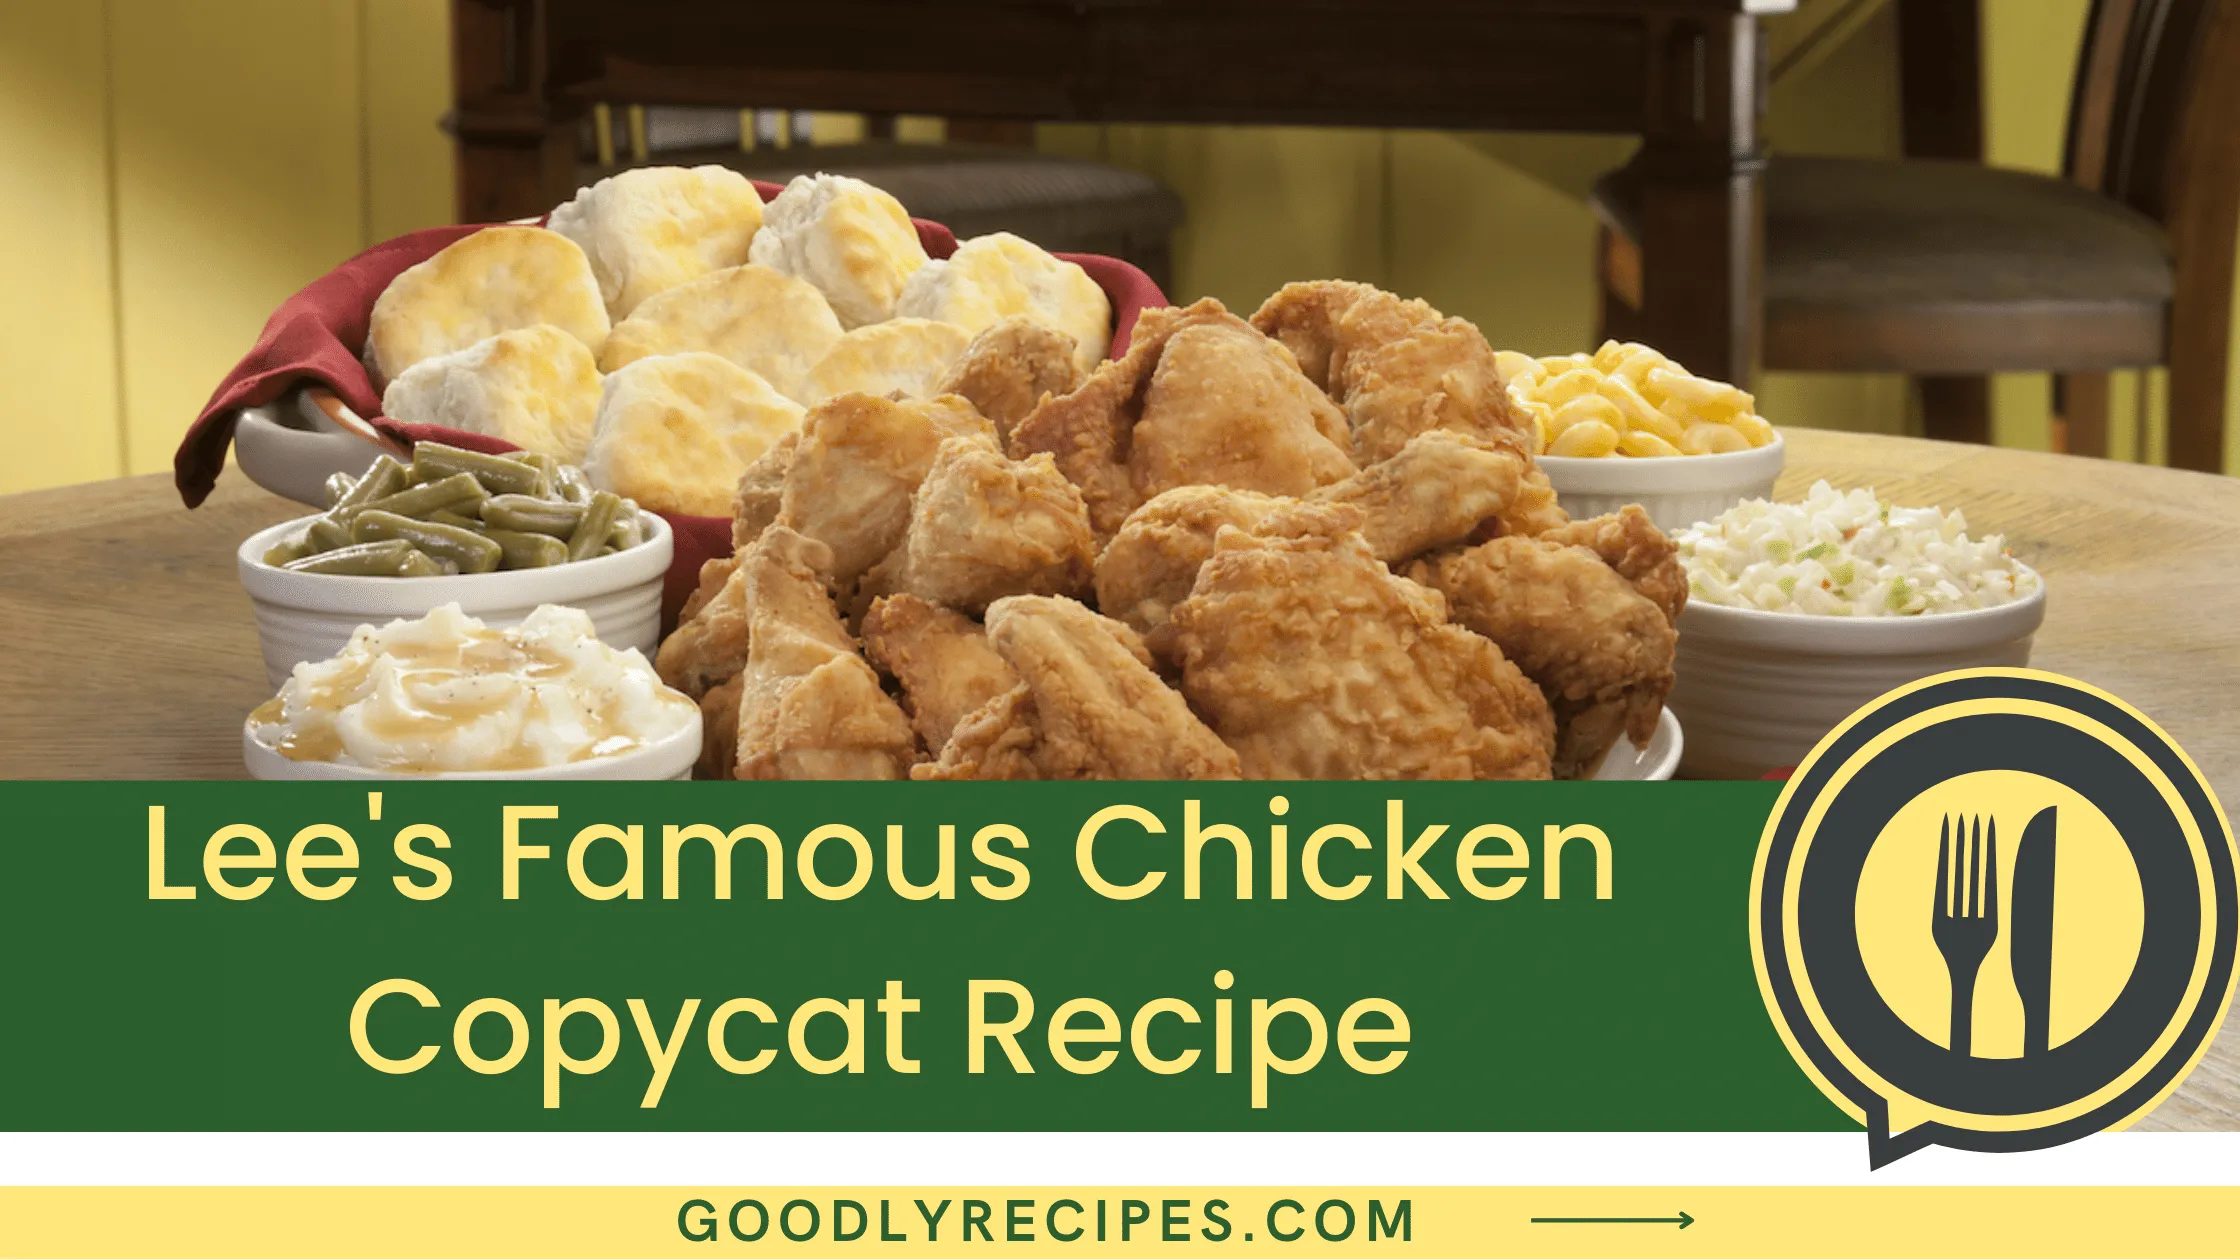 Lee's Famous Chicken Copycat Recipe - For Food Lovers